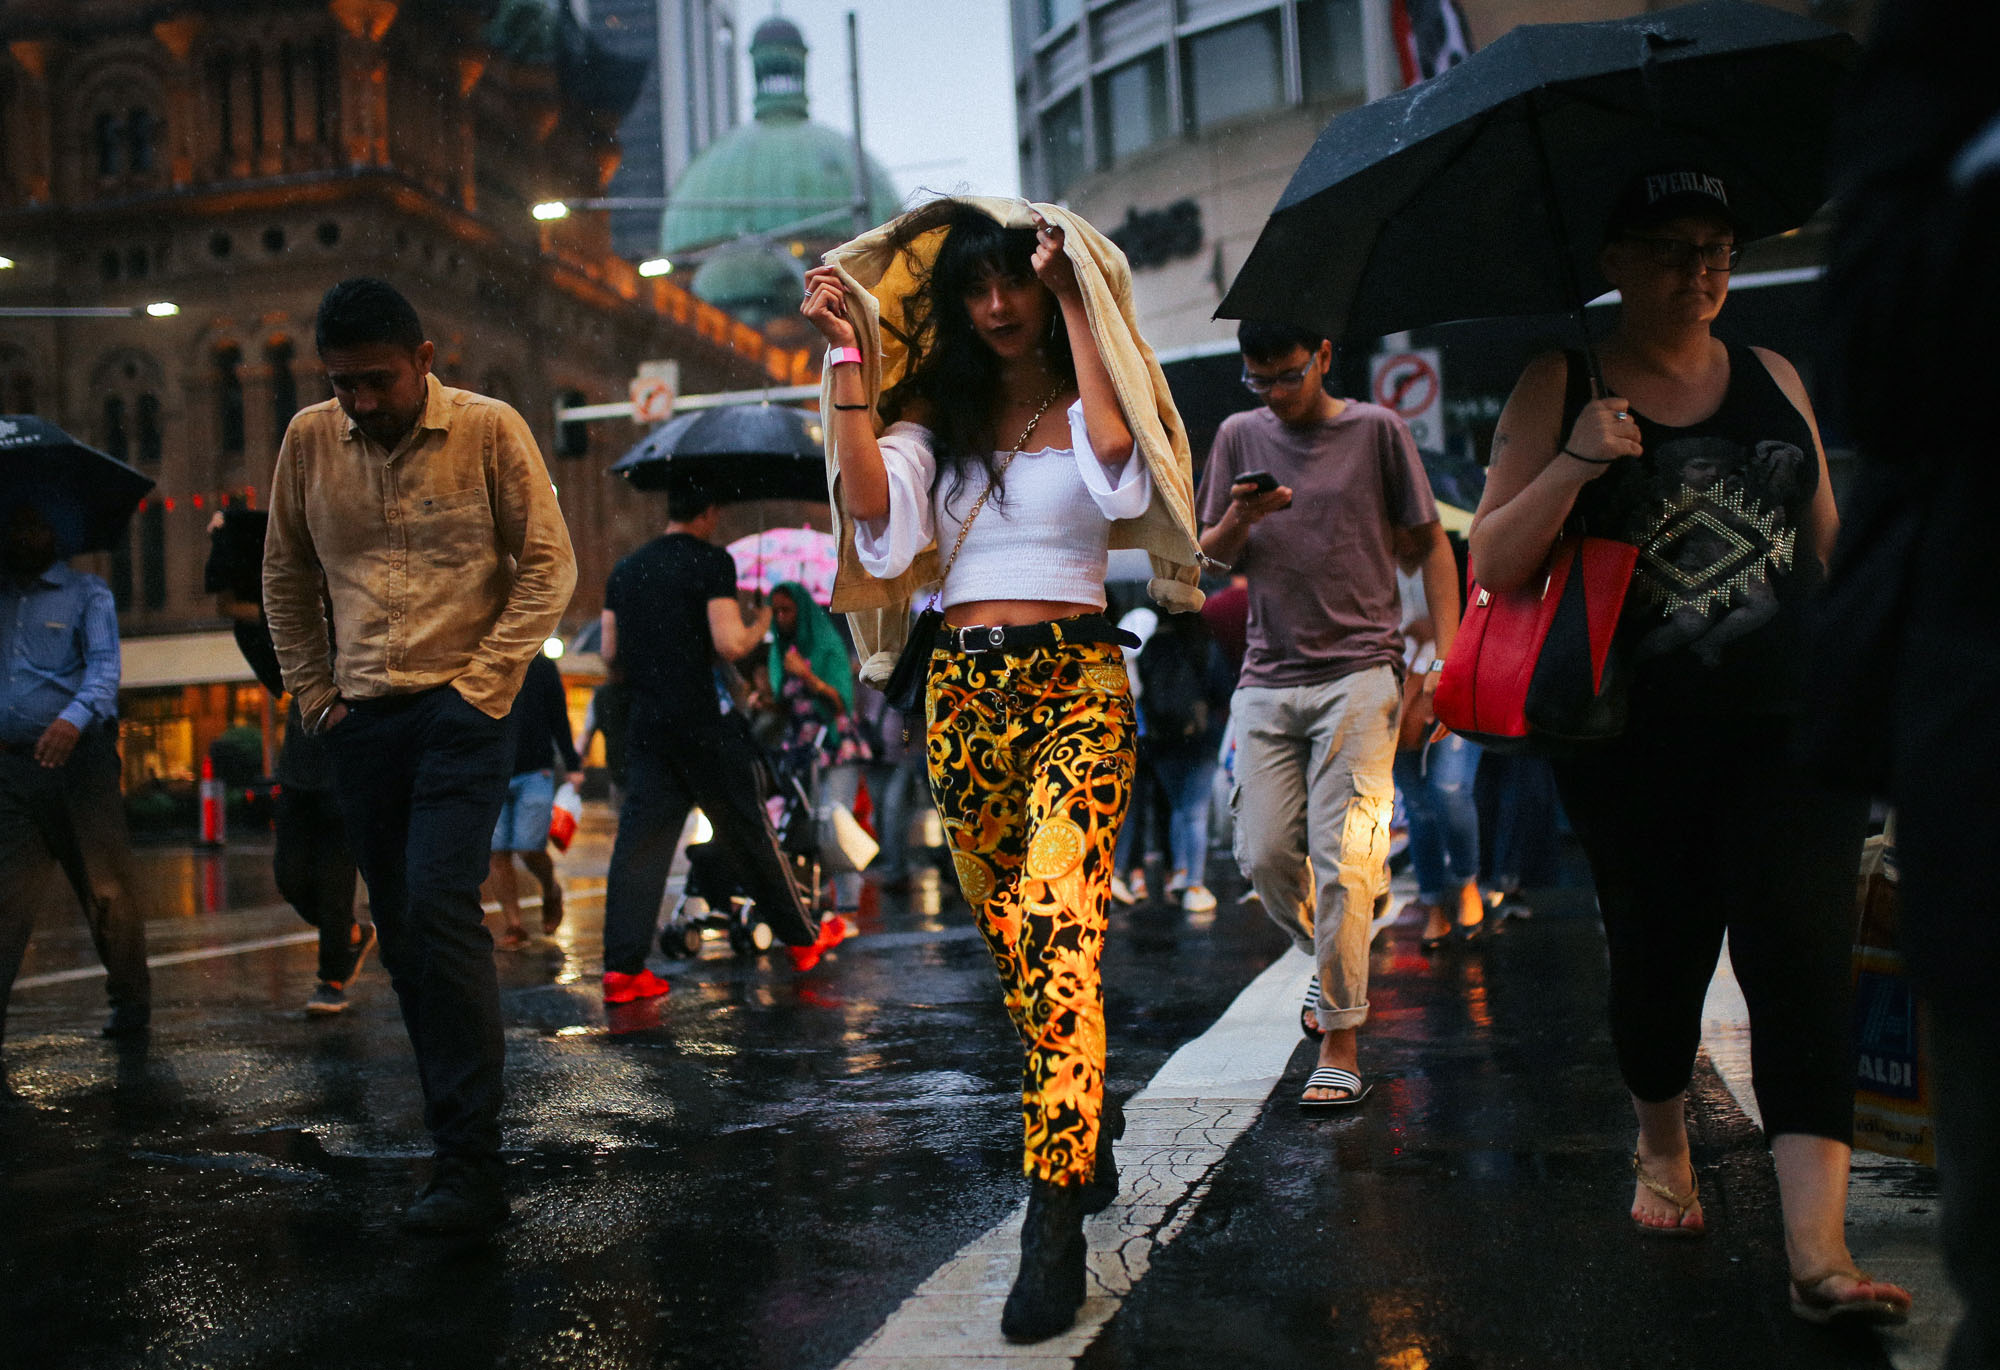  A woman shelters herself from the rain as she crosses the street with other pedestrians during a rain shower in central Sydney, Australia. 